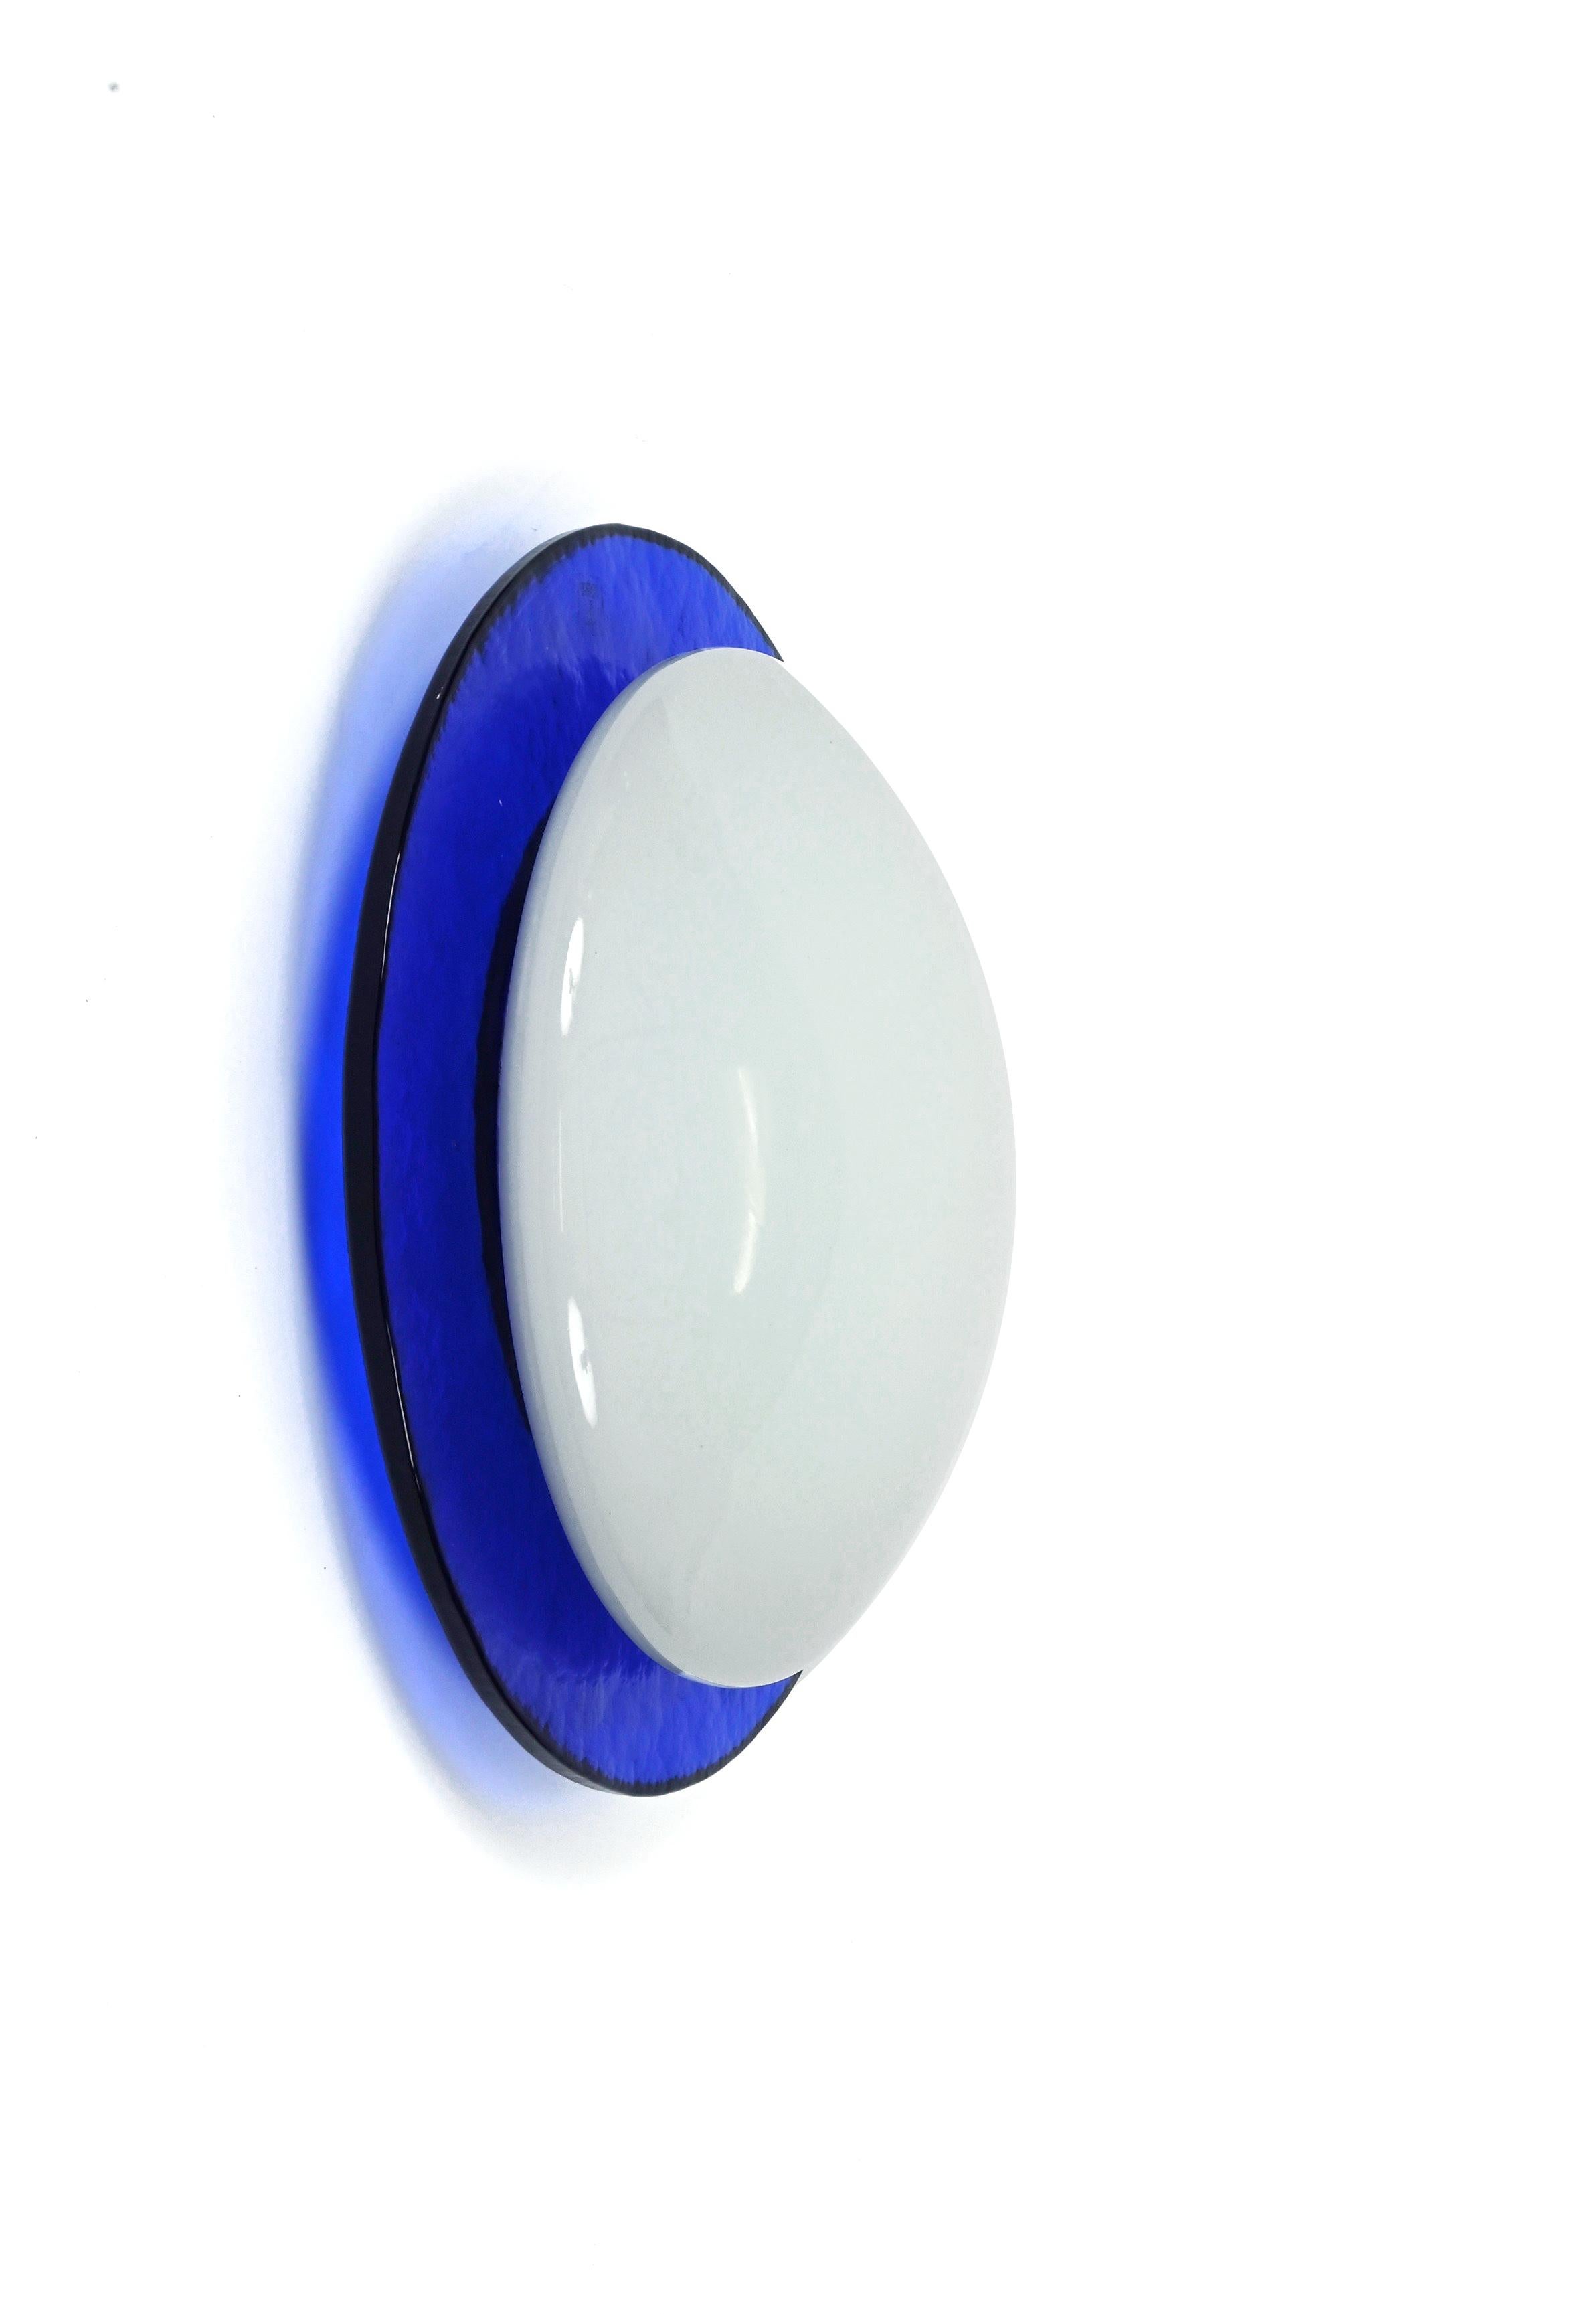 Fantastic mouth-blown round wall or ceiling sconce in embossed blue and white Murano glass. This magnificent light was designed in Italy during the 1980s.

This piece is wonderful because of the overlapping of a white Murano glass on the round